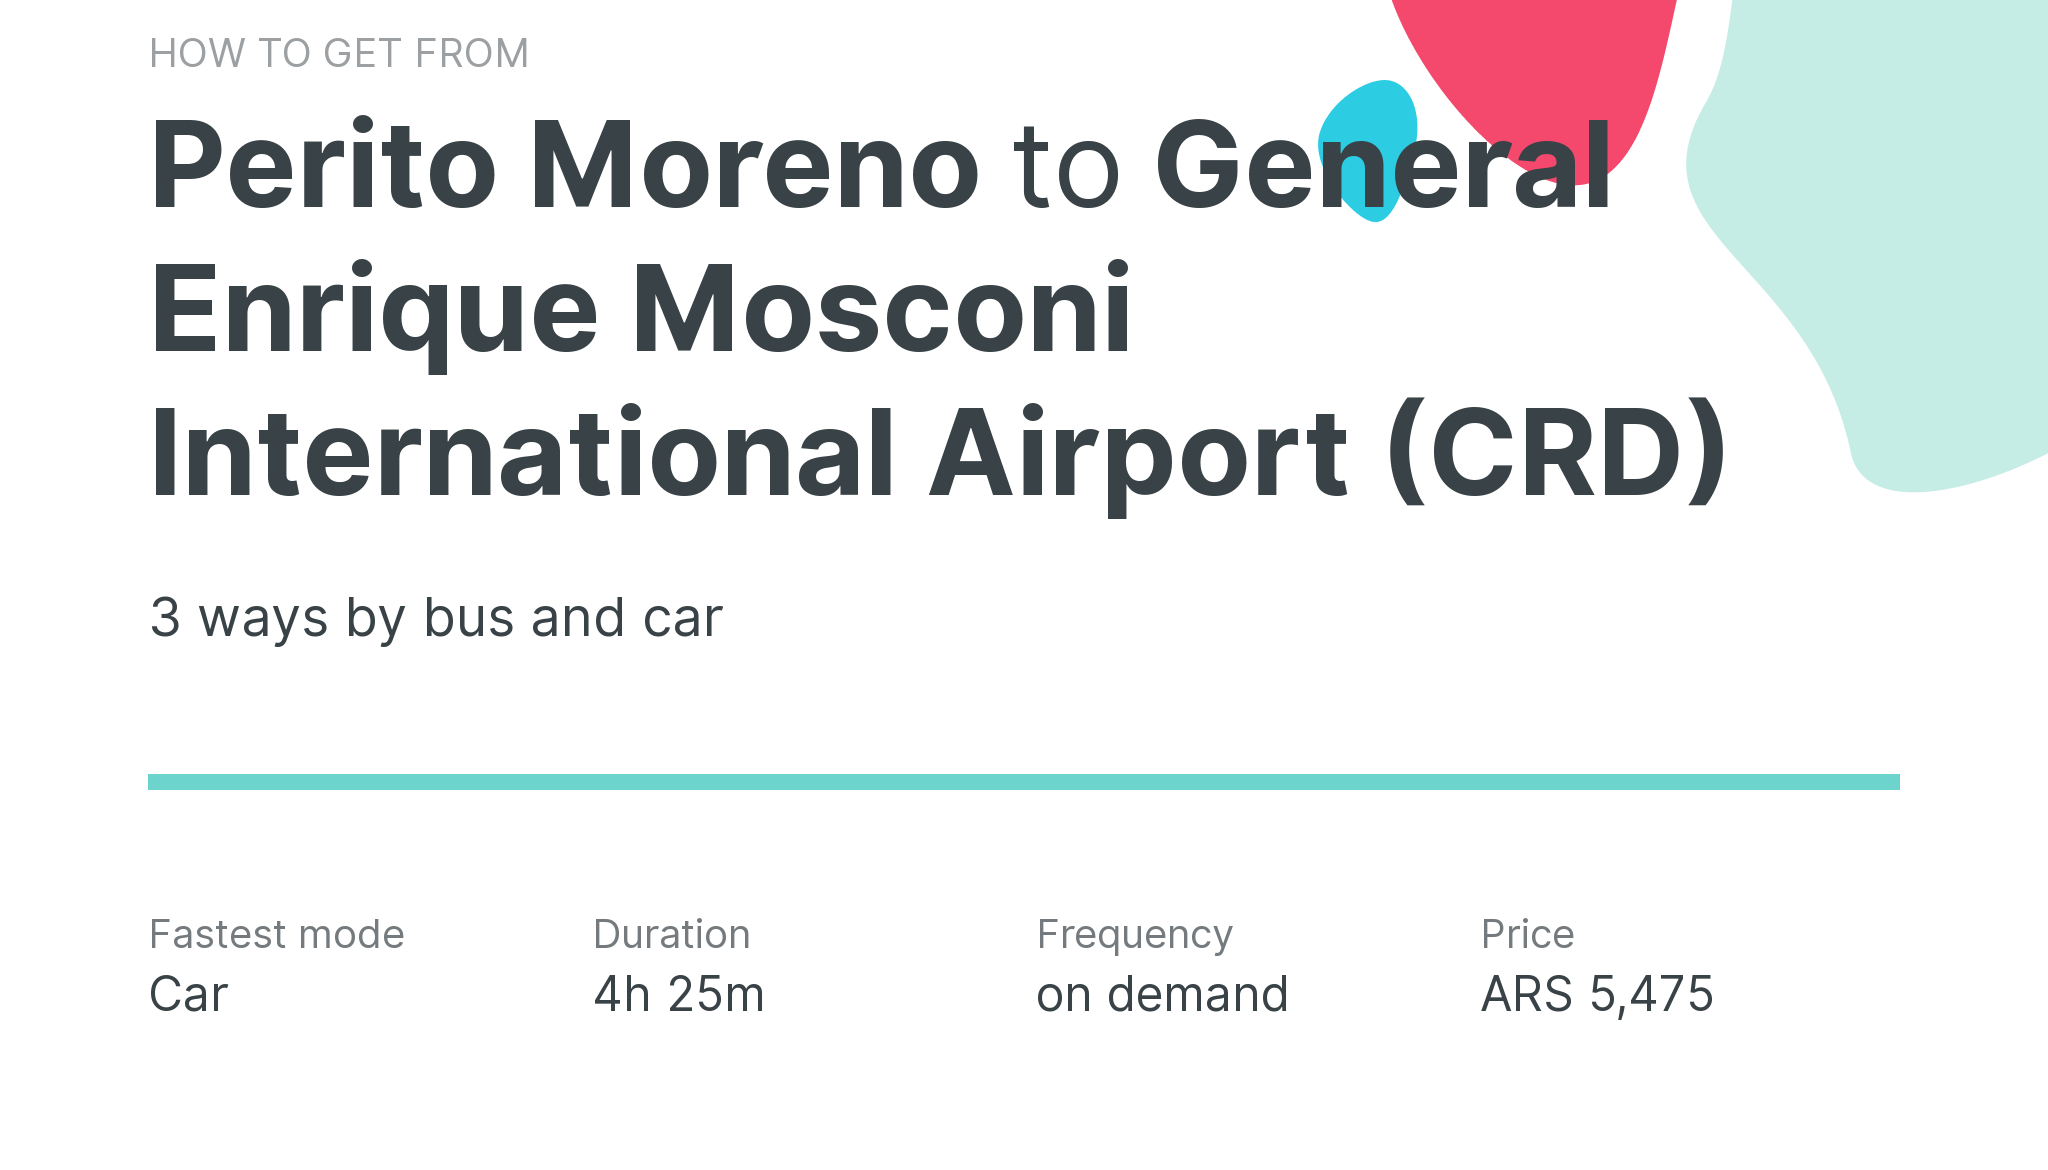 How do I get from Perito Moreno to General Enrique Mosconi International Airport (CRD)